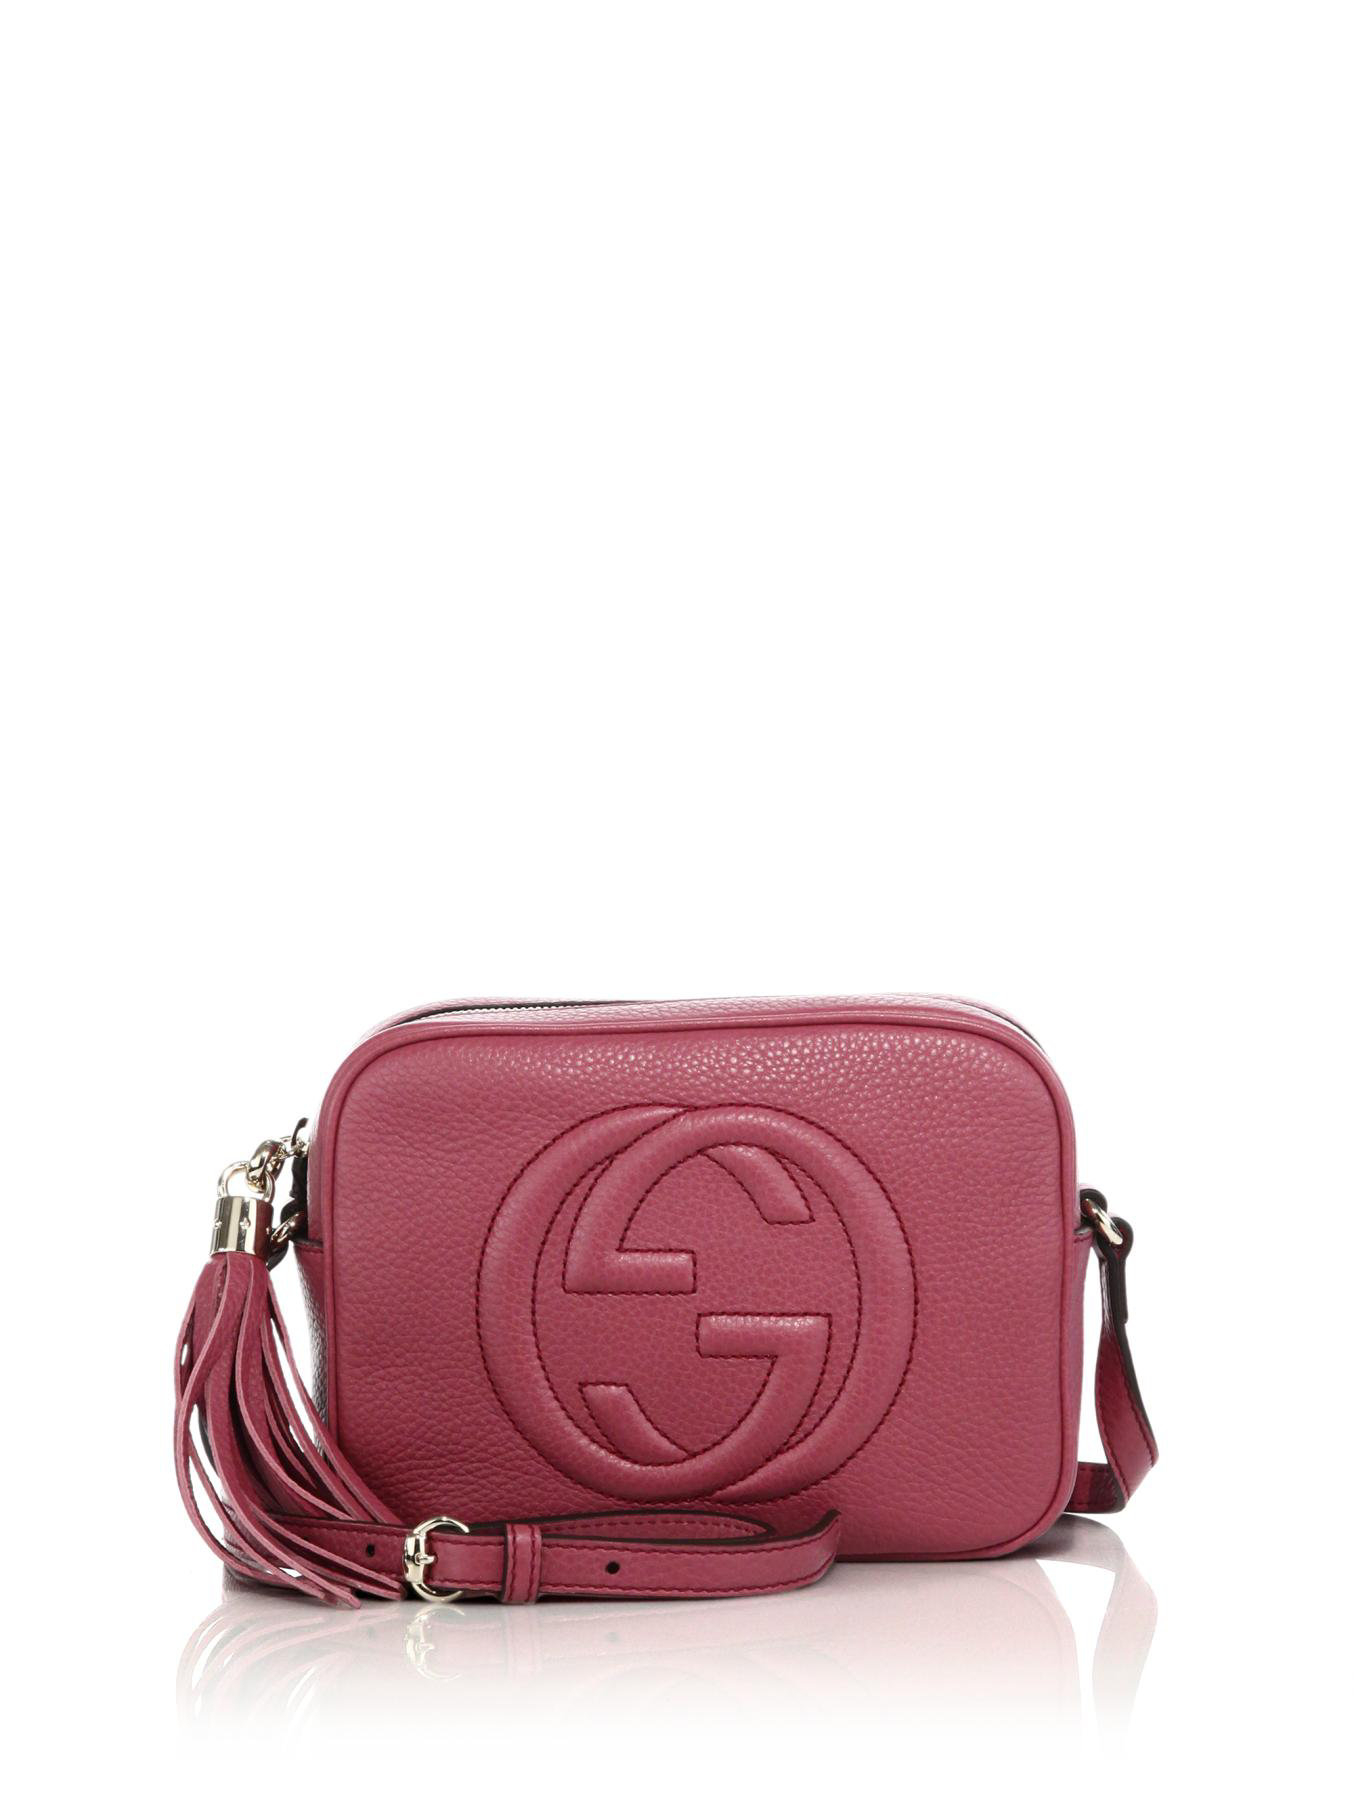 Gucci Soho Leather Disco Bag in Pink - Lyst